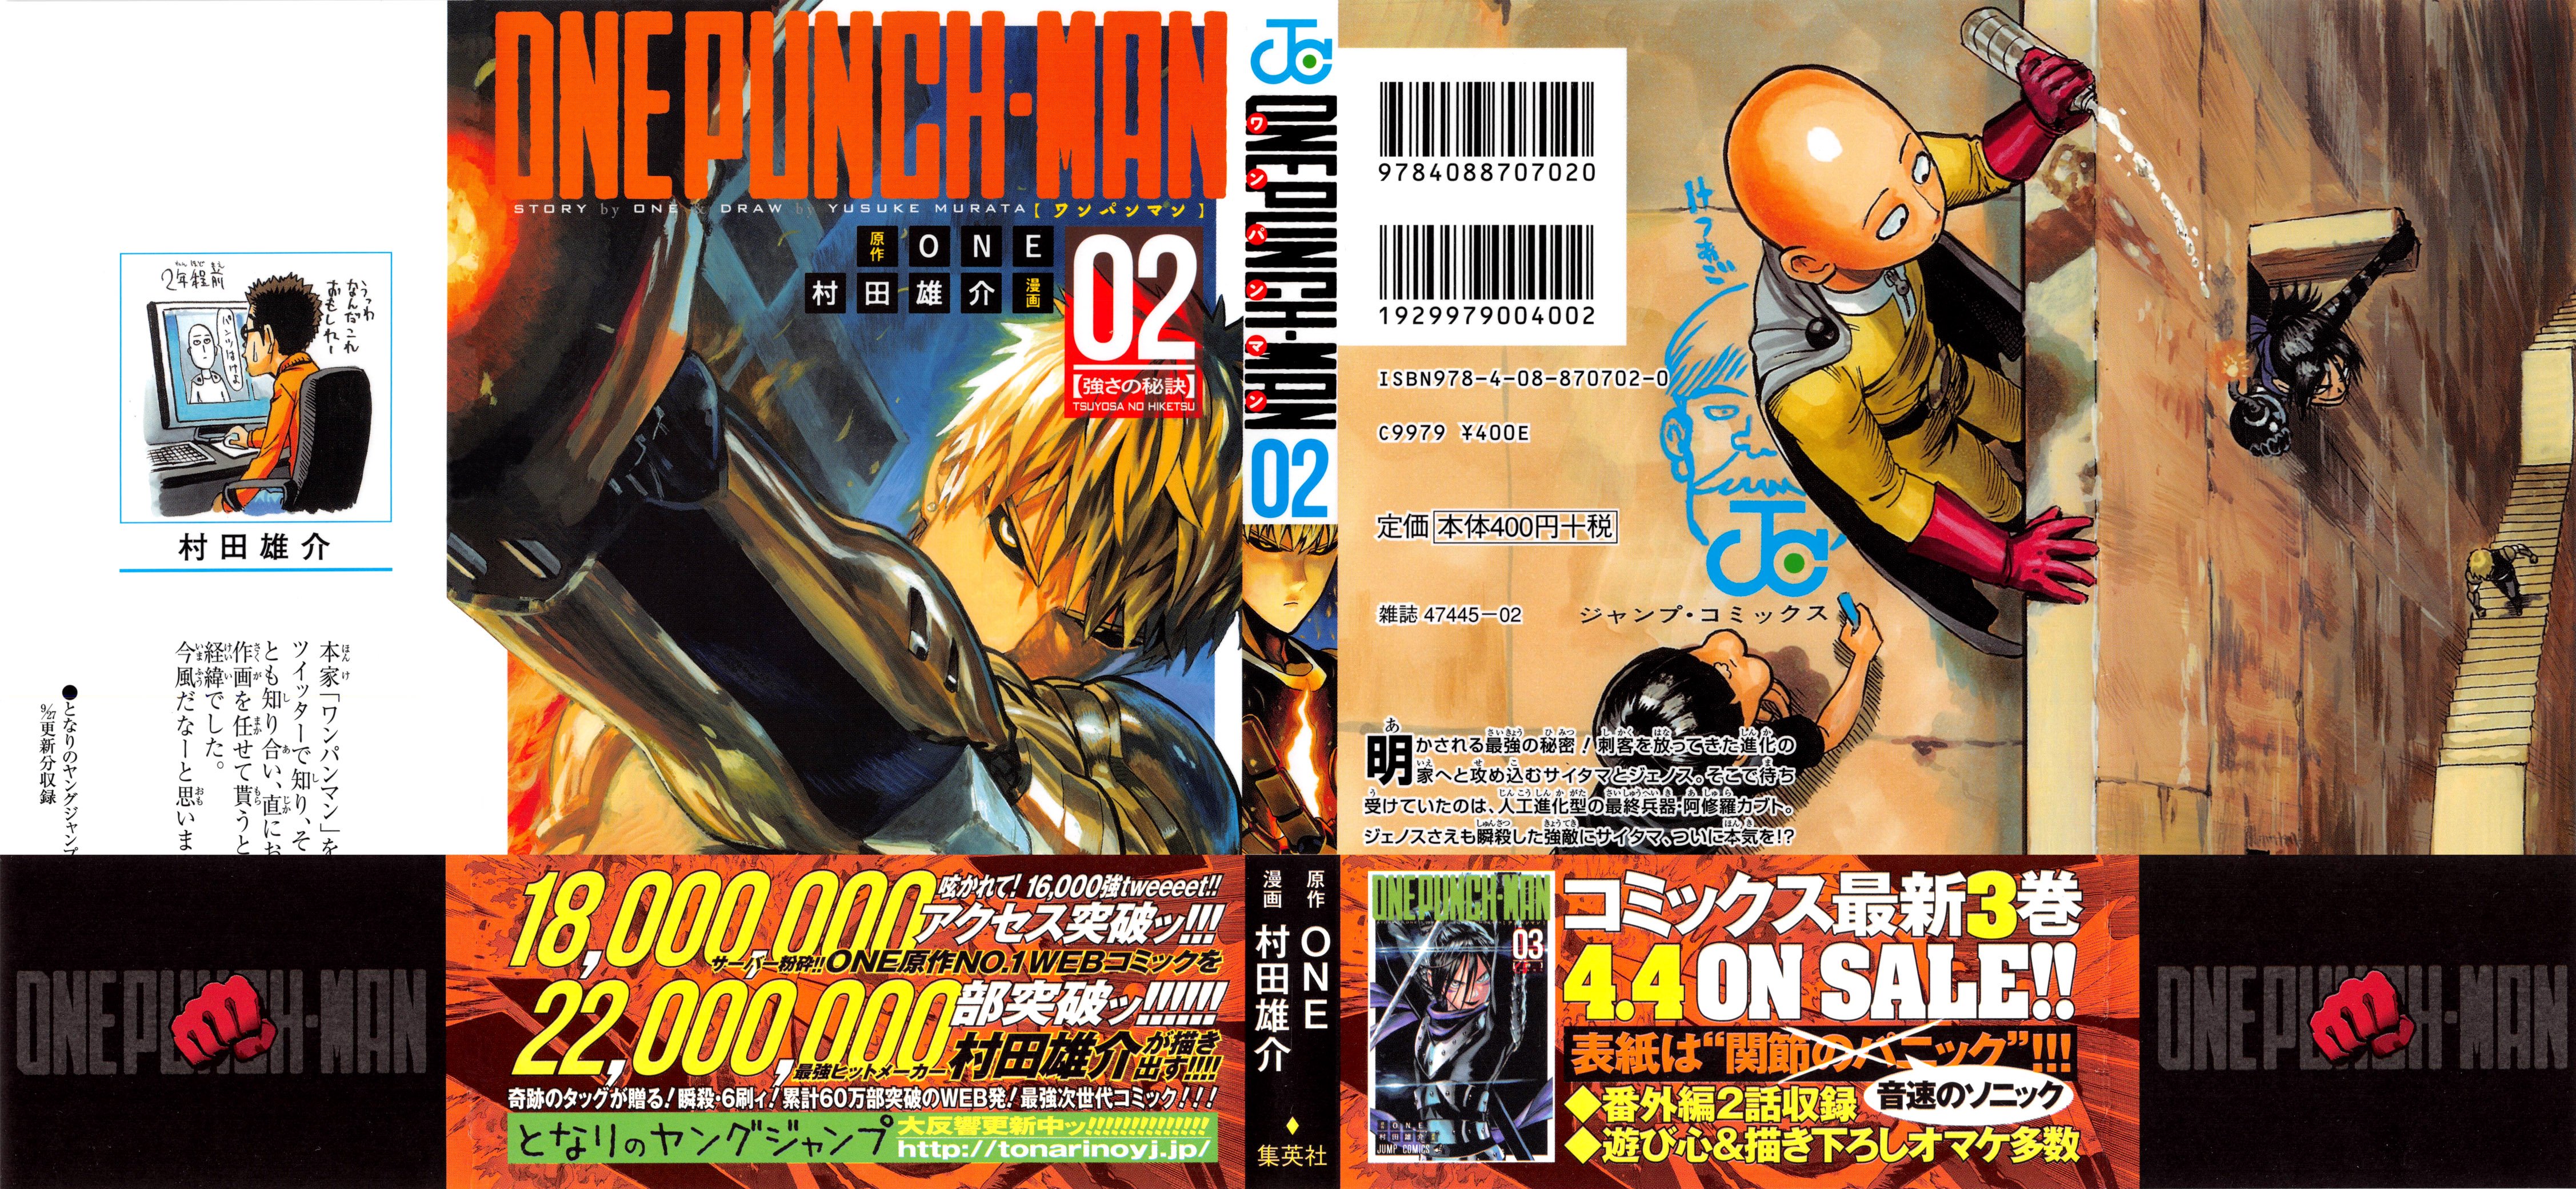 One Punch Man, Chapter 9 - House of Evolution image 02